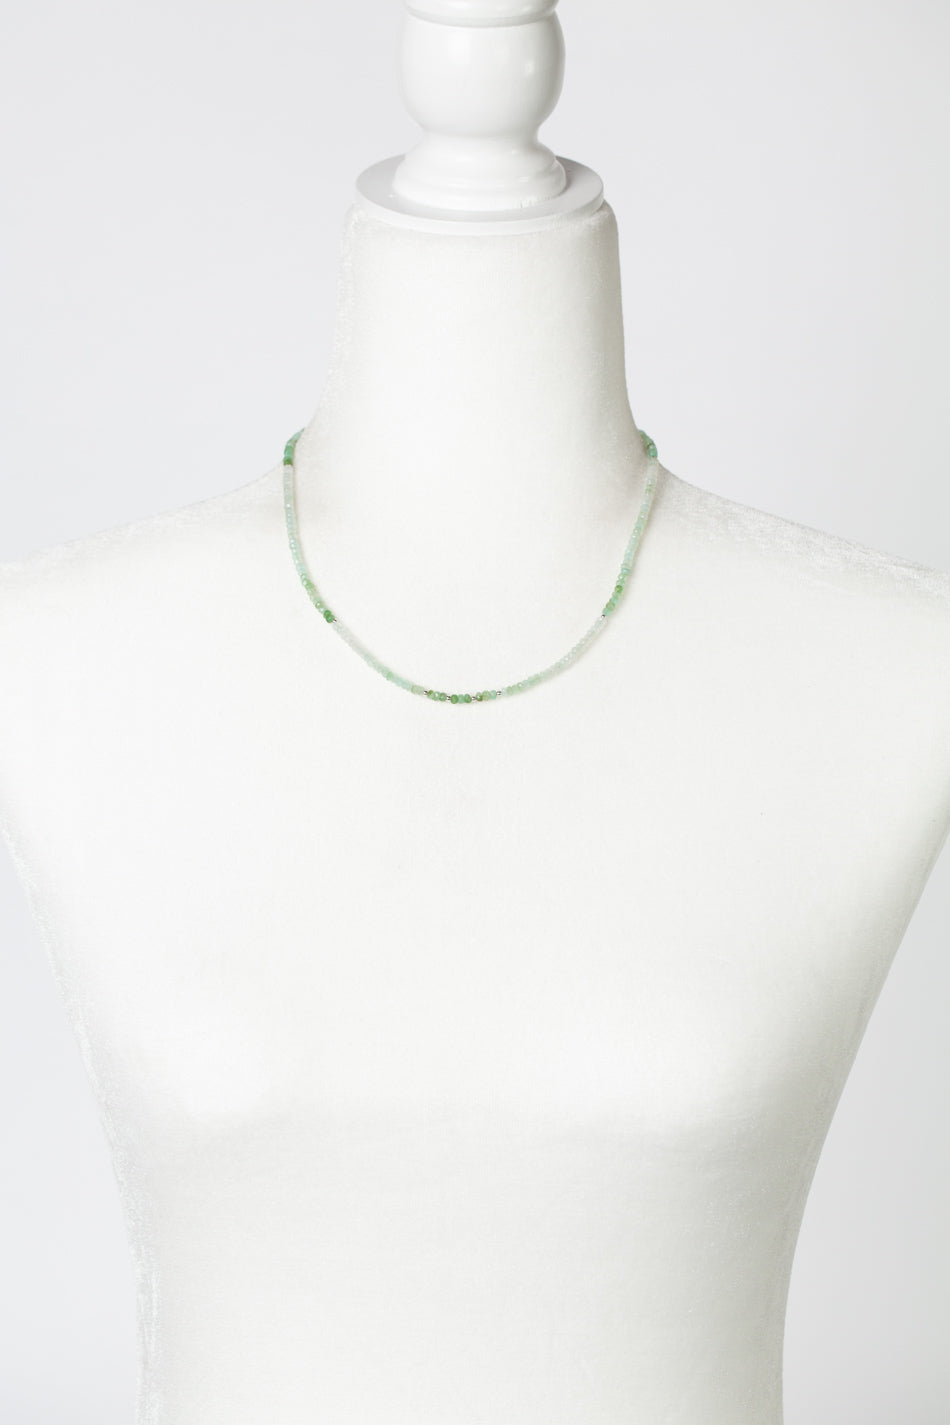 Spring Frost 17-19" Green Opal Simple Necklace